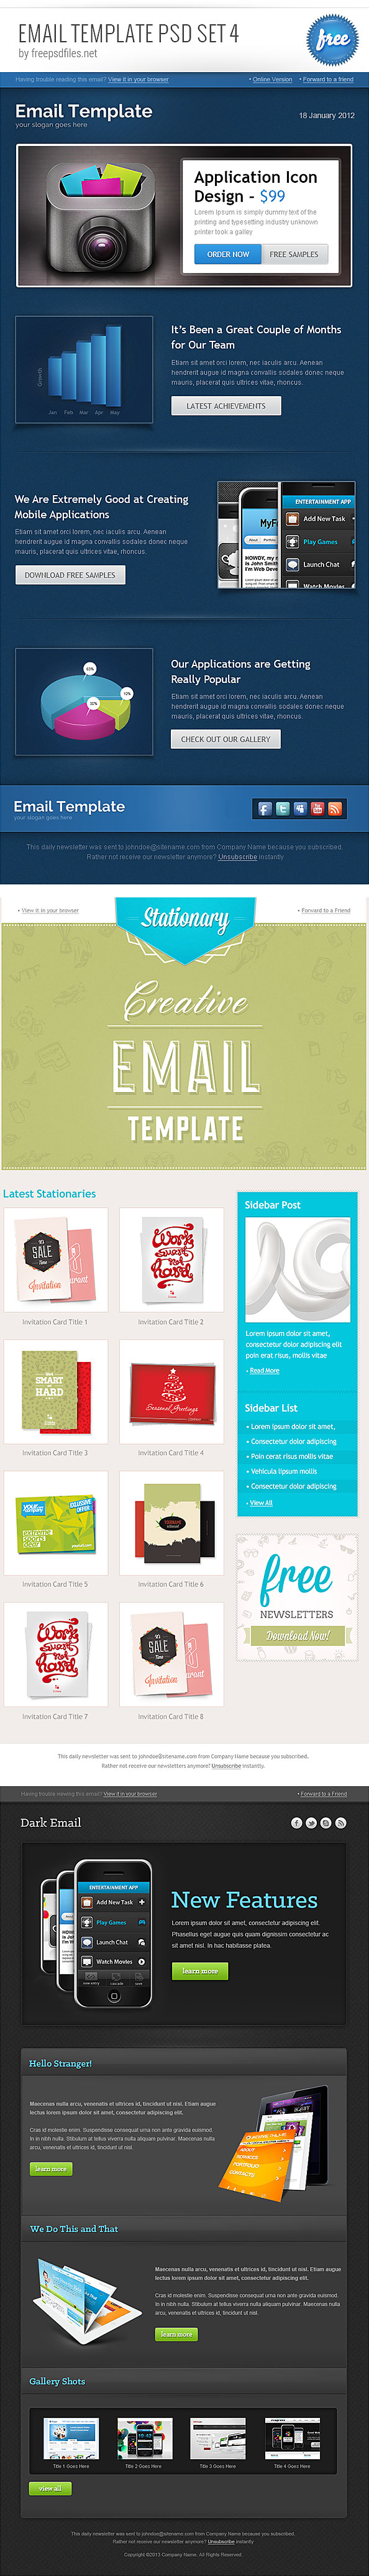 Email Template PSD Set 4